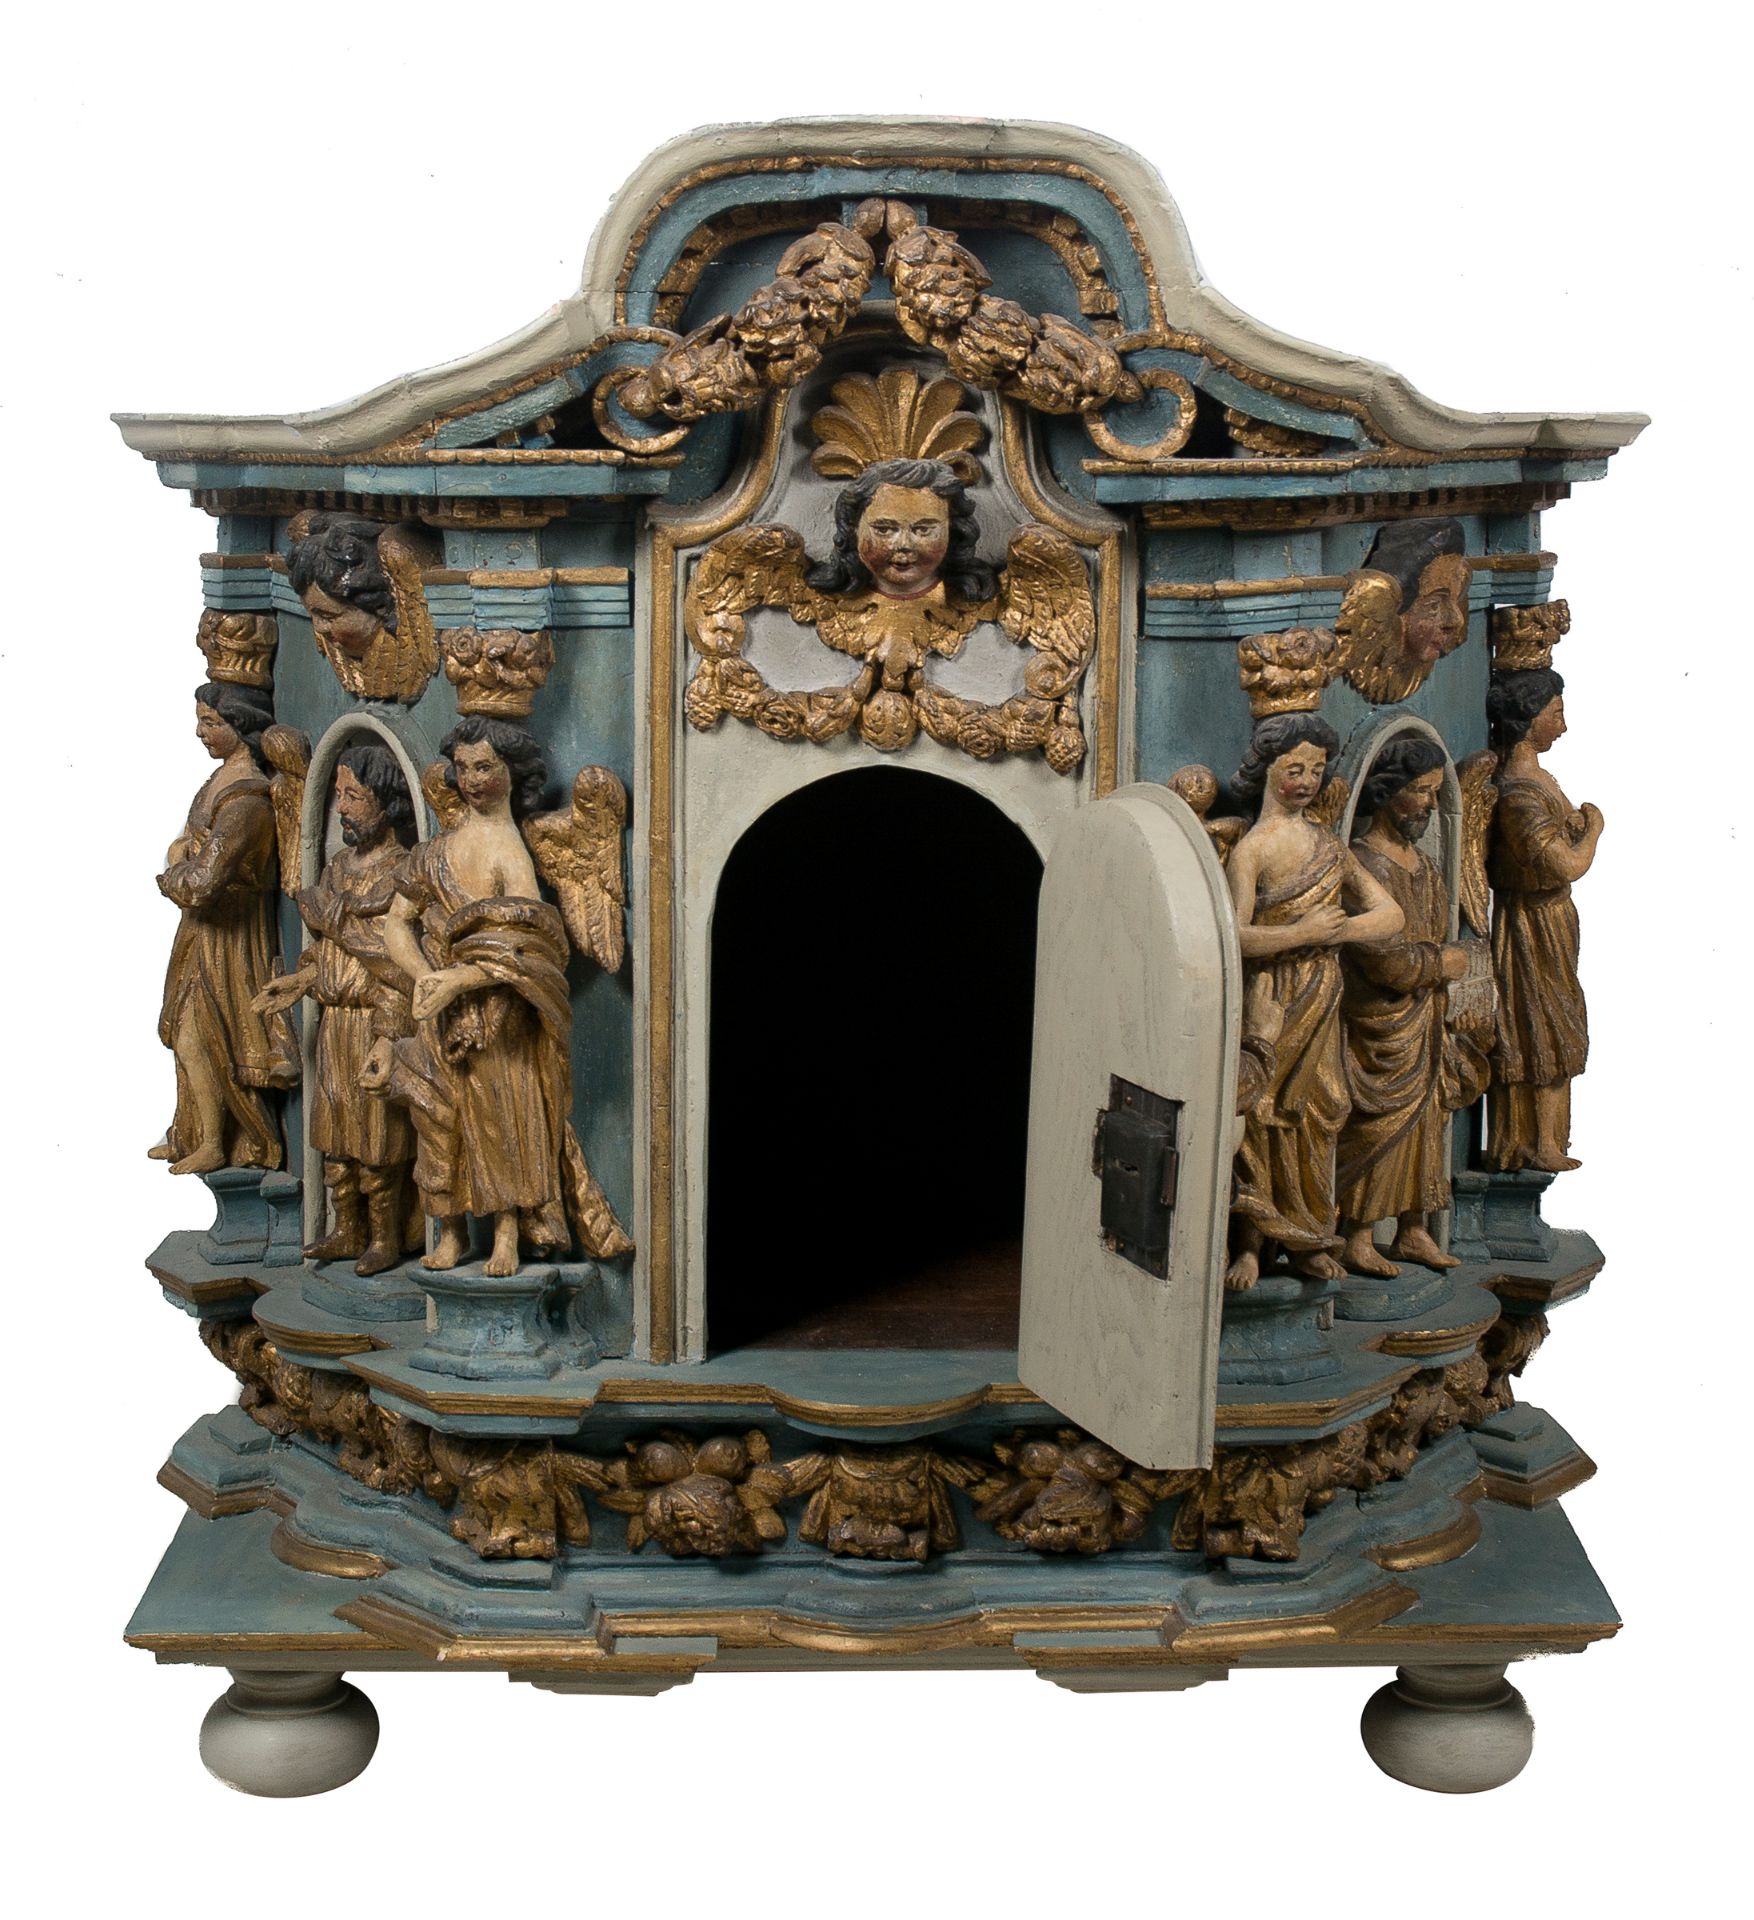 Carved, gilded and polychromed wooden tabernacle. Baroque. 17th century. - Image 2 of 5